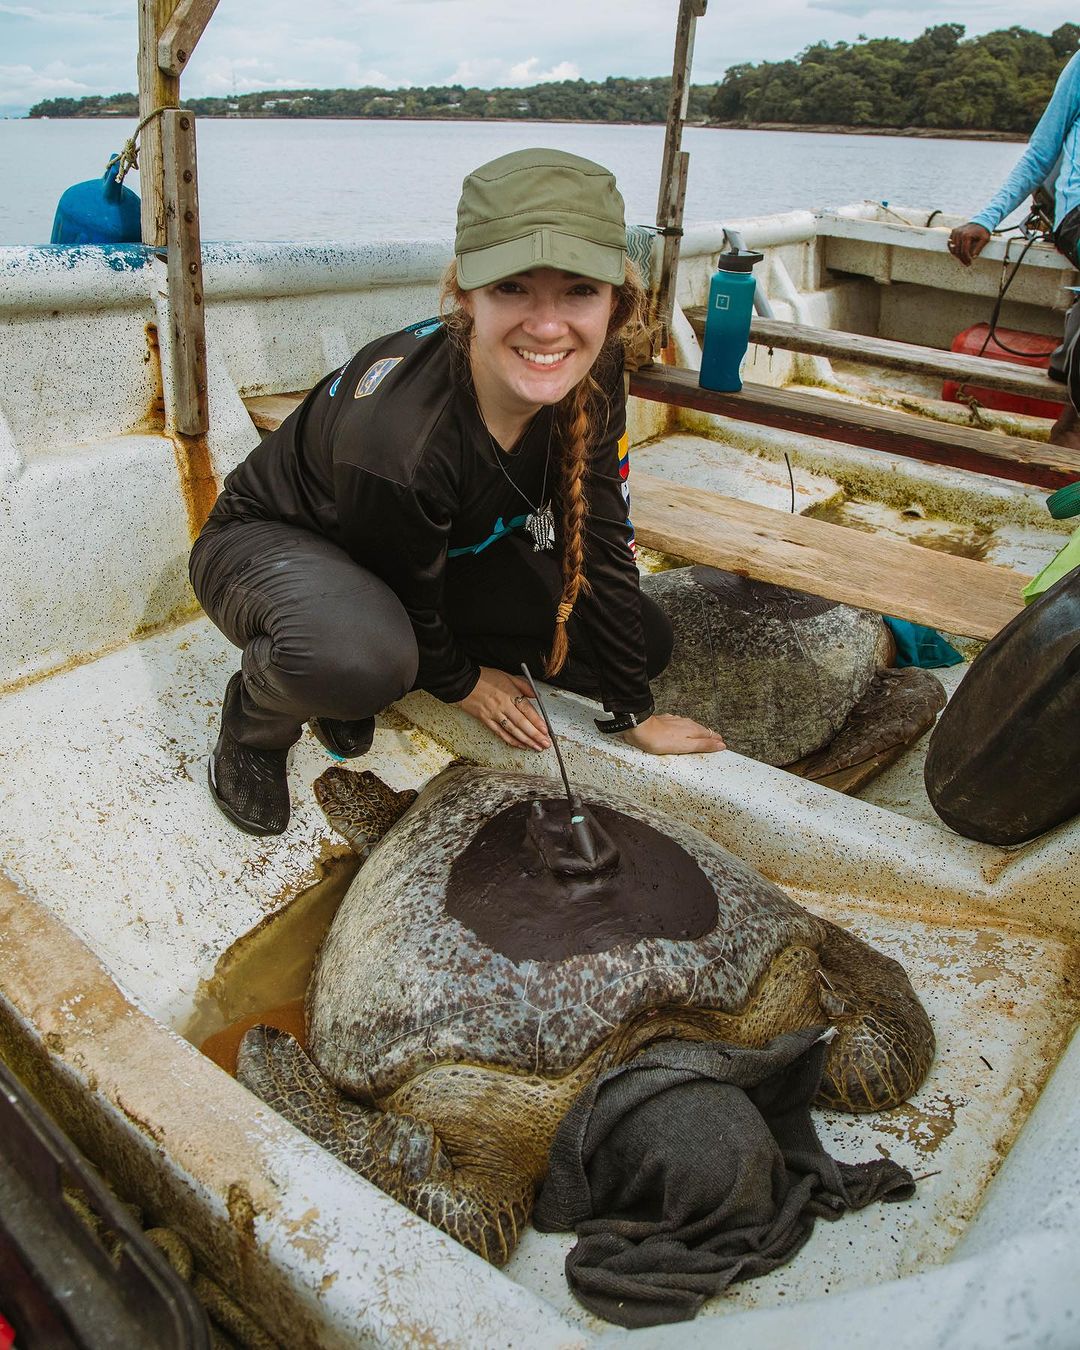 Turtle Tagging Is Making An Important Contribution To Protect Vulnerable Marine Species